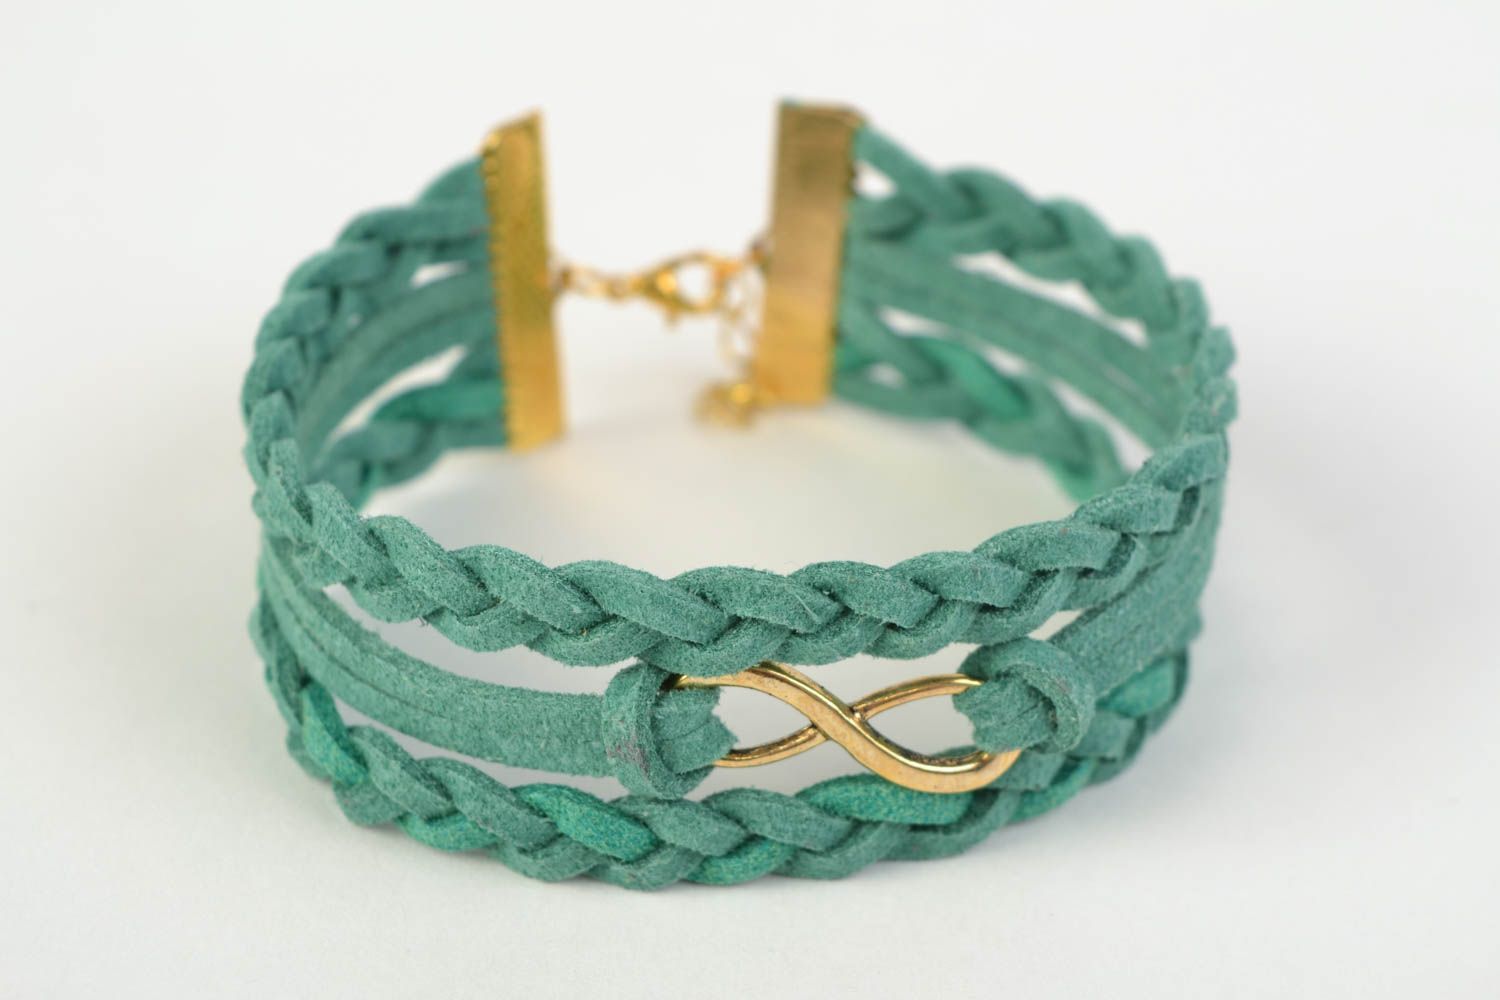 Handmade multi row suede cord woven wrist bracelet of turquoise color with charm photo 3